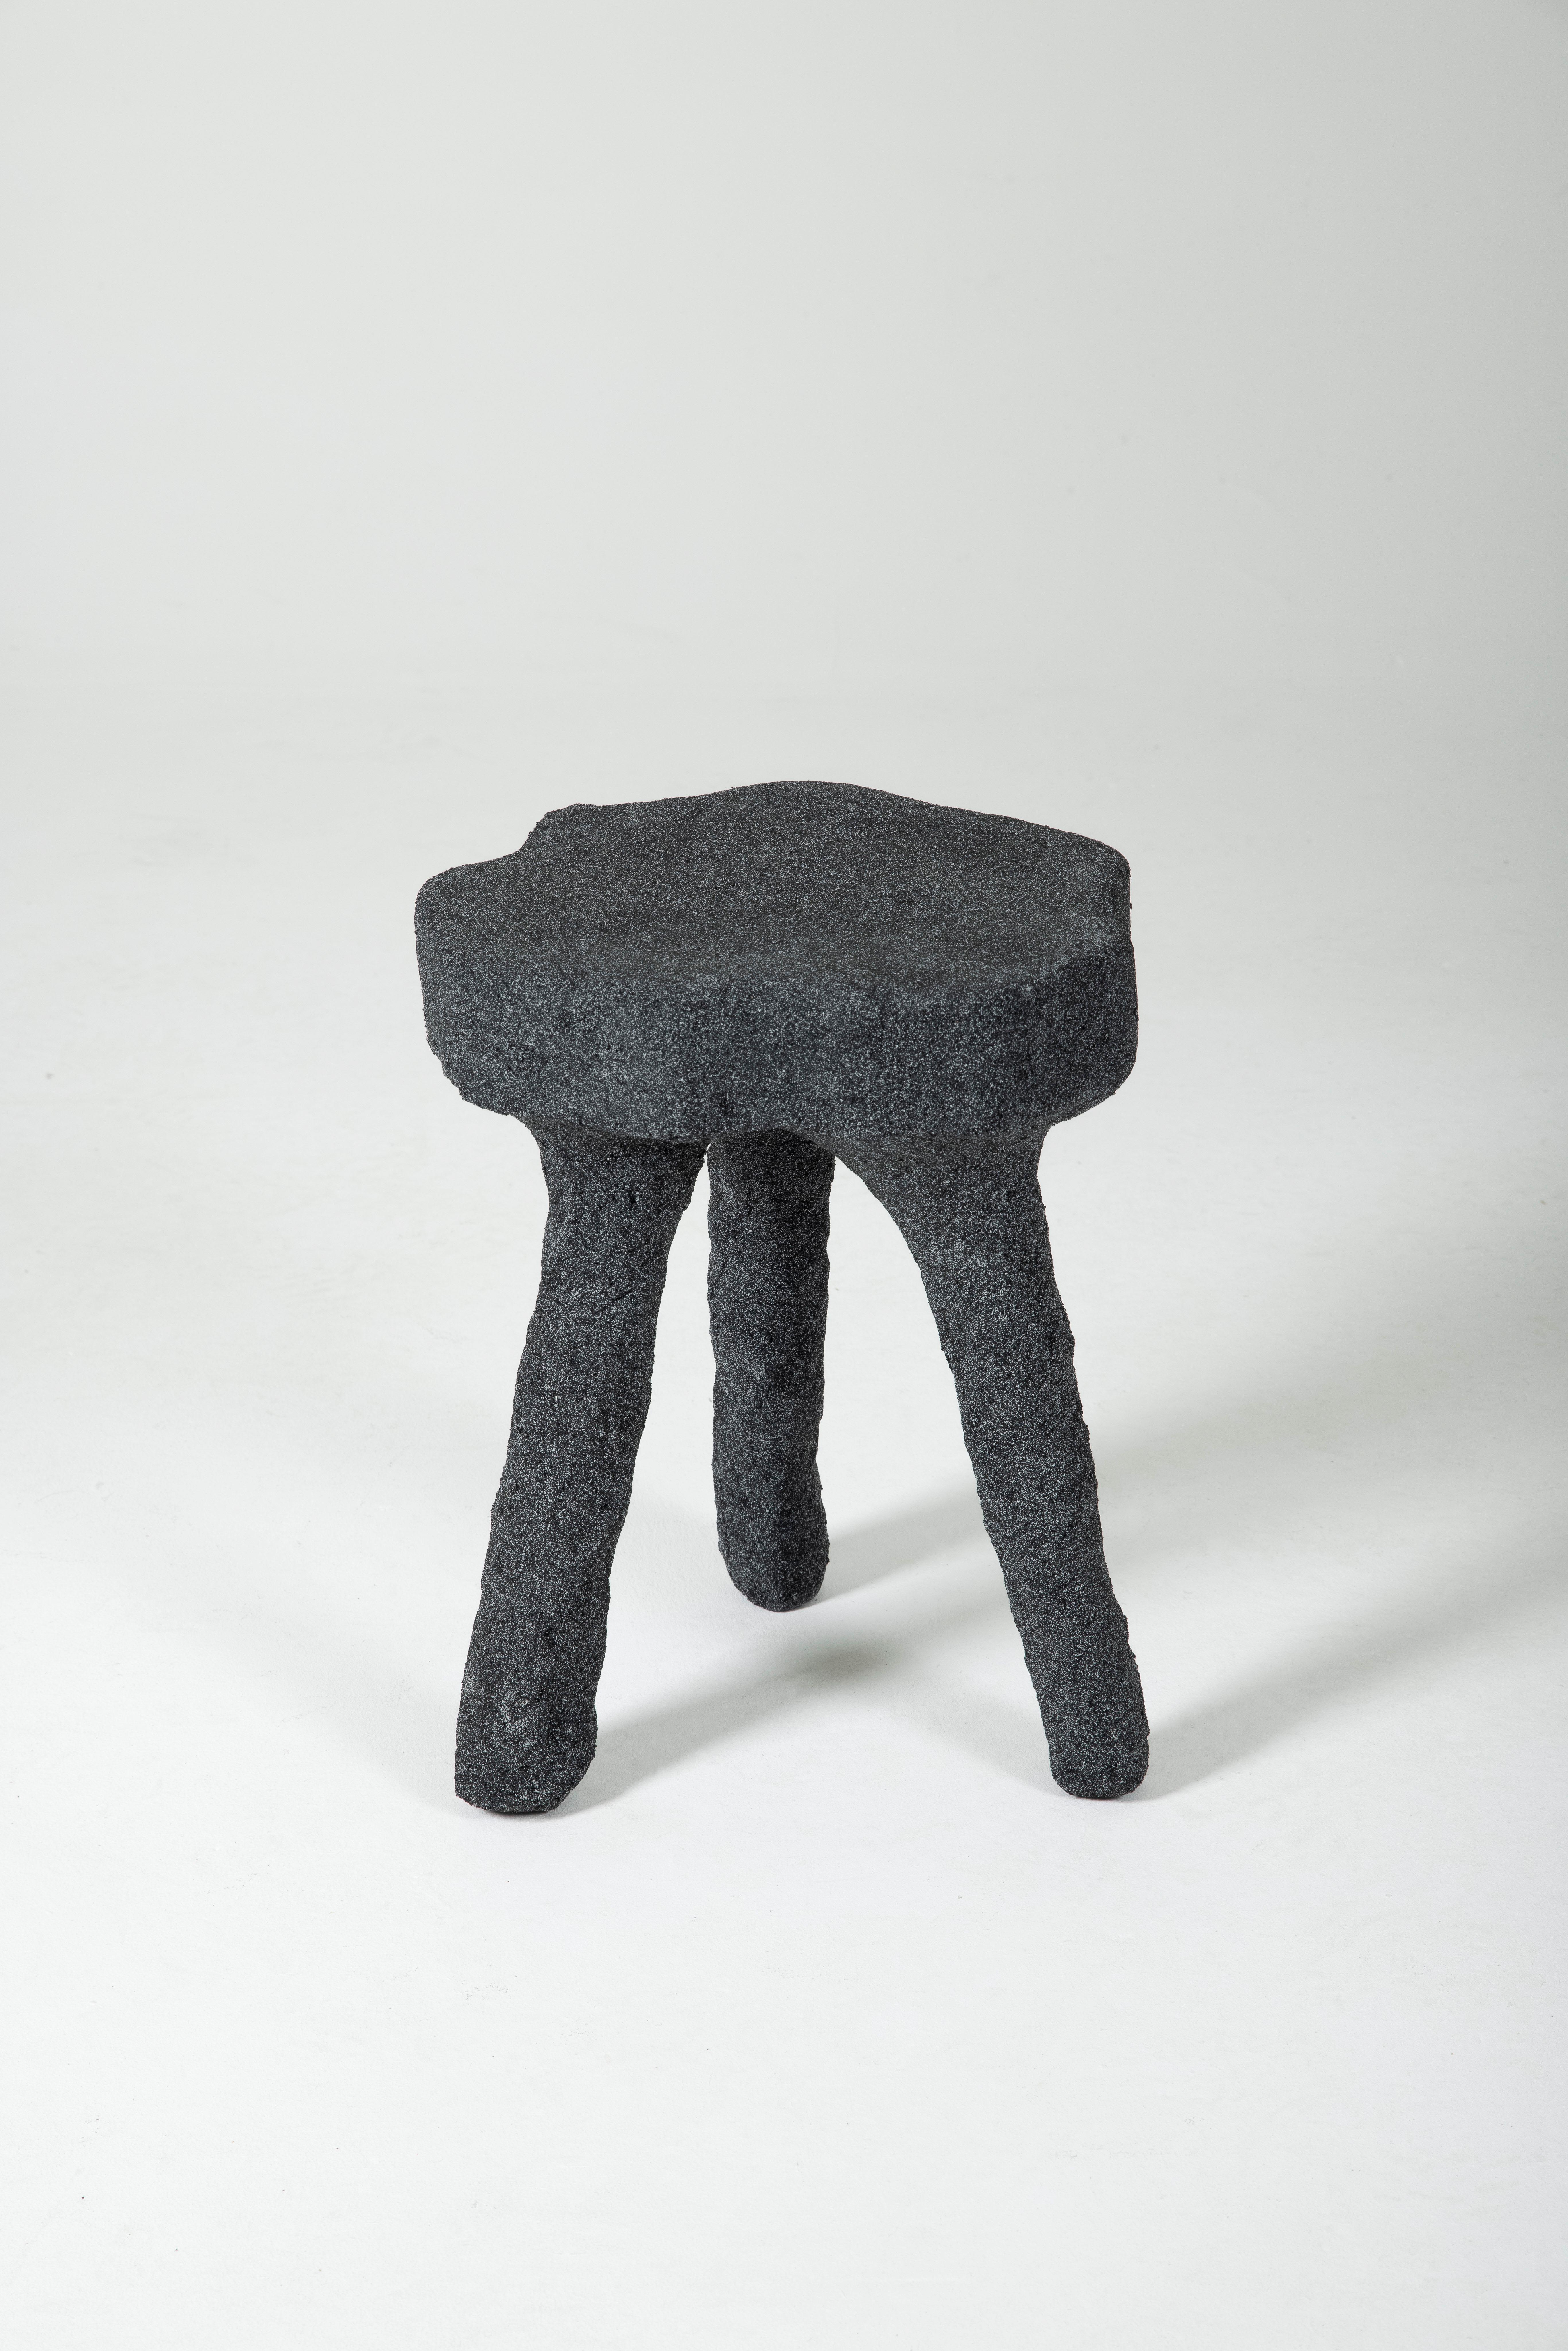 Other Pedestal Table in Plaster and Black Sand by Paul Hardy